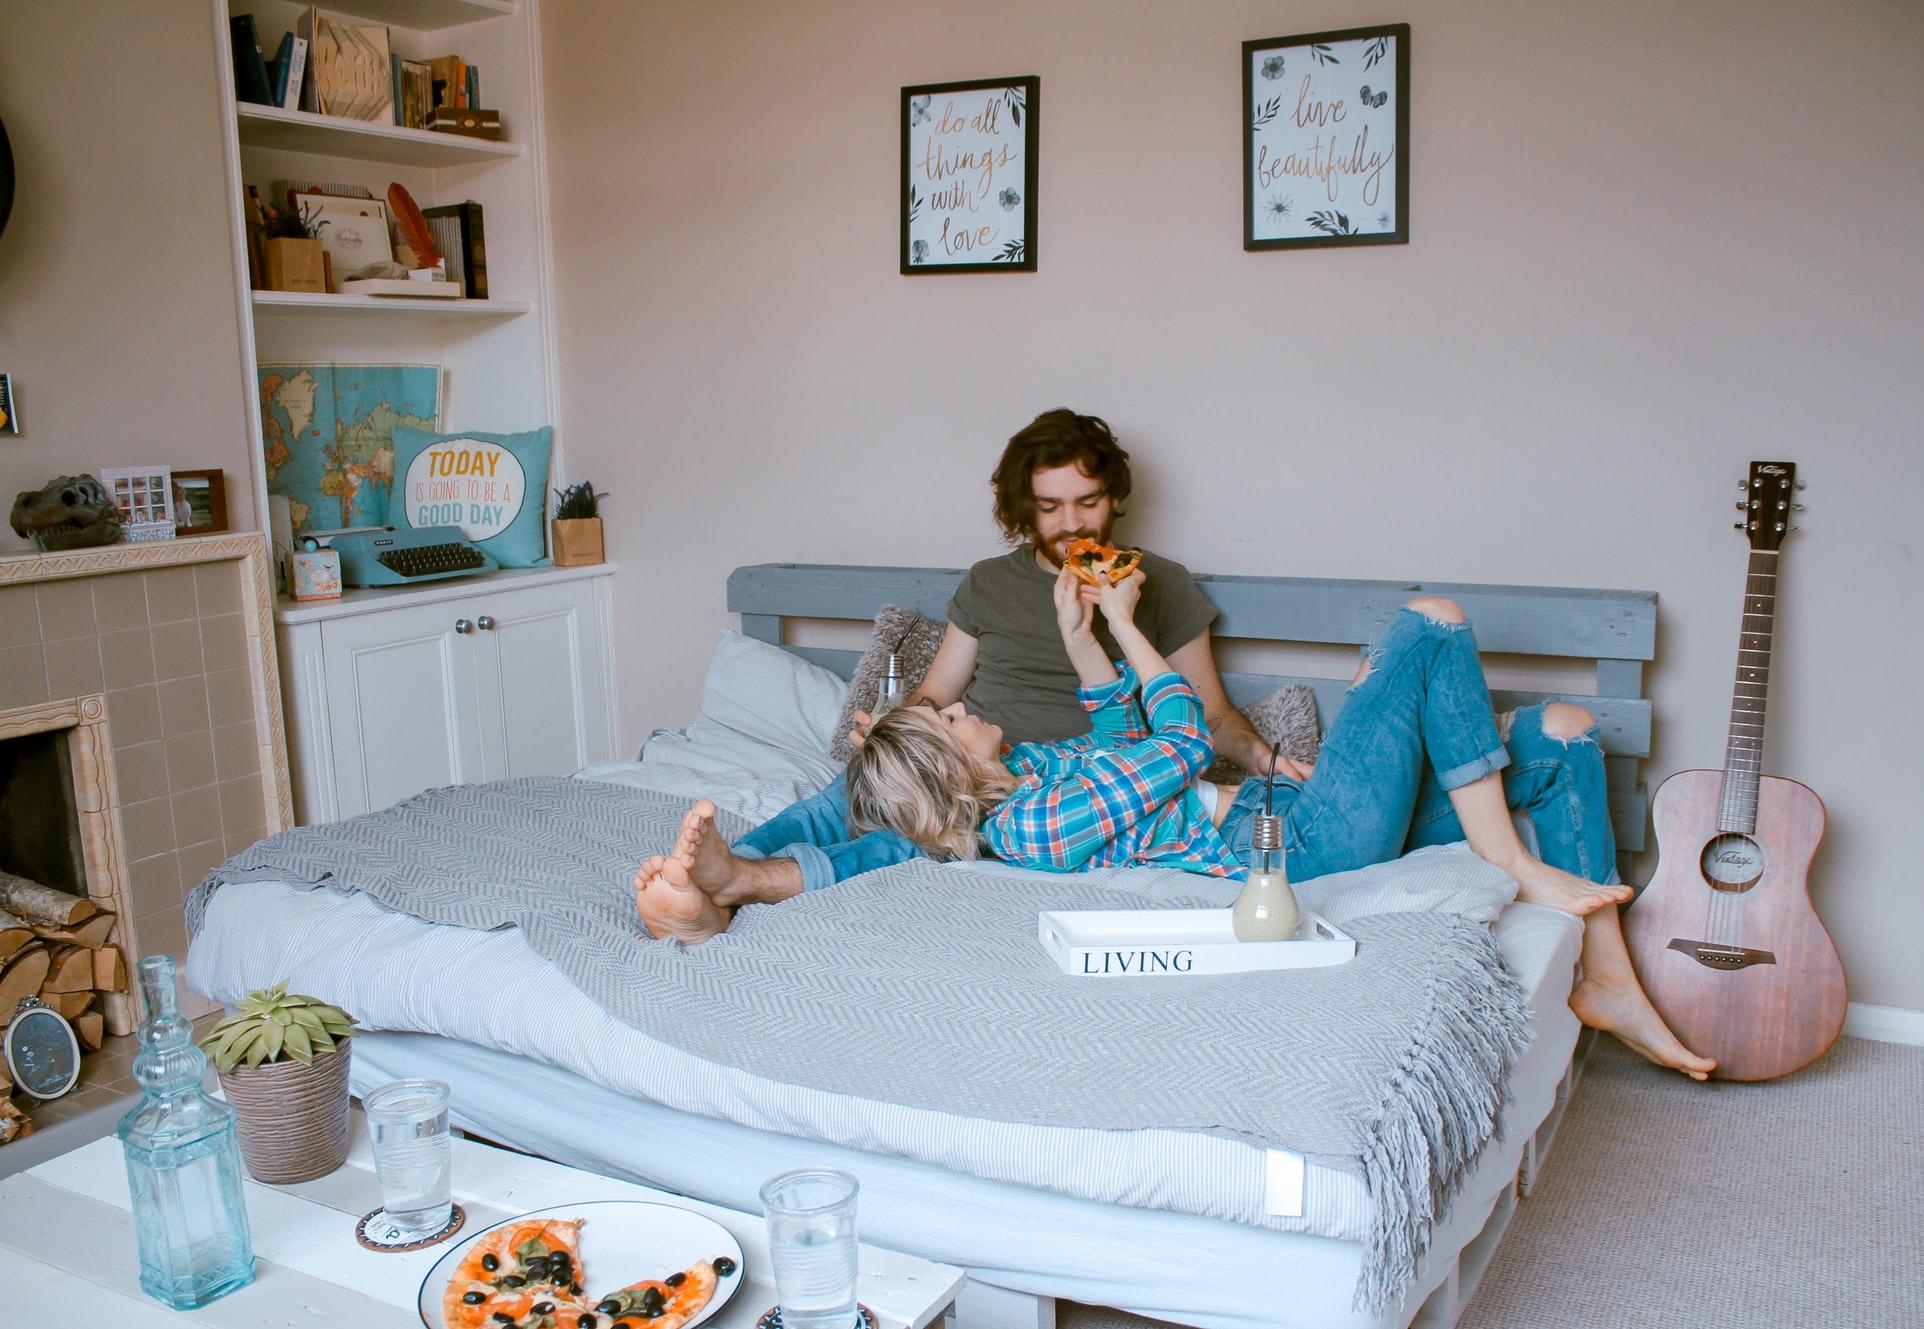 A photo of a man and a woman lounging at home